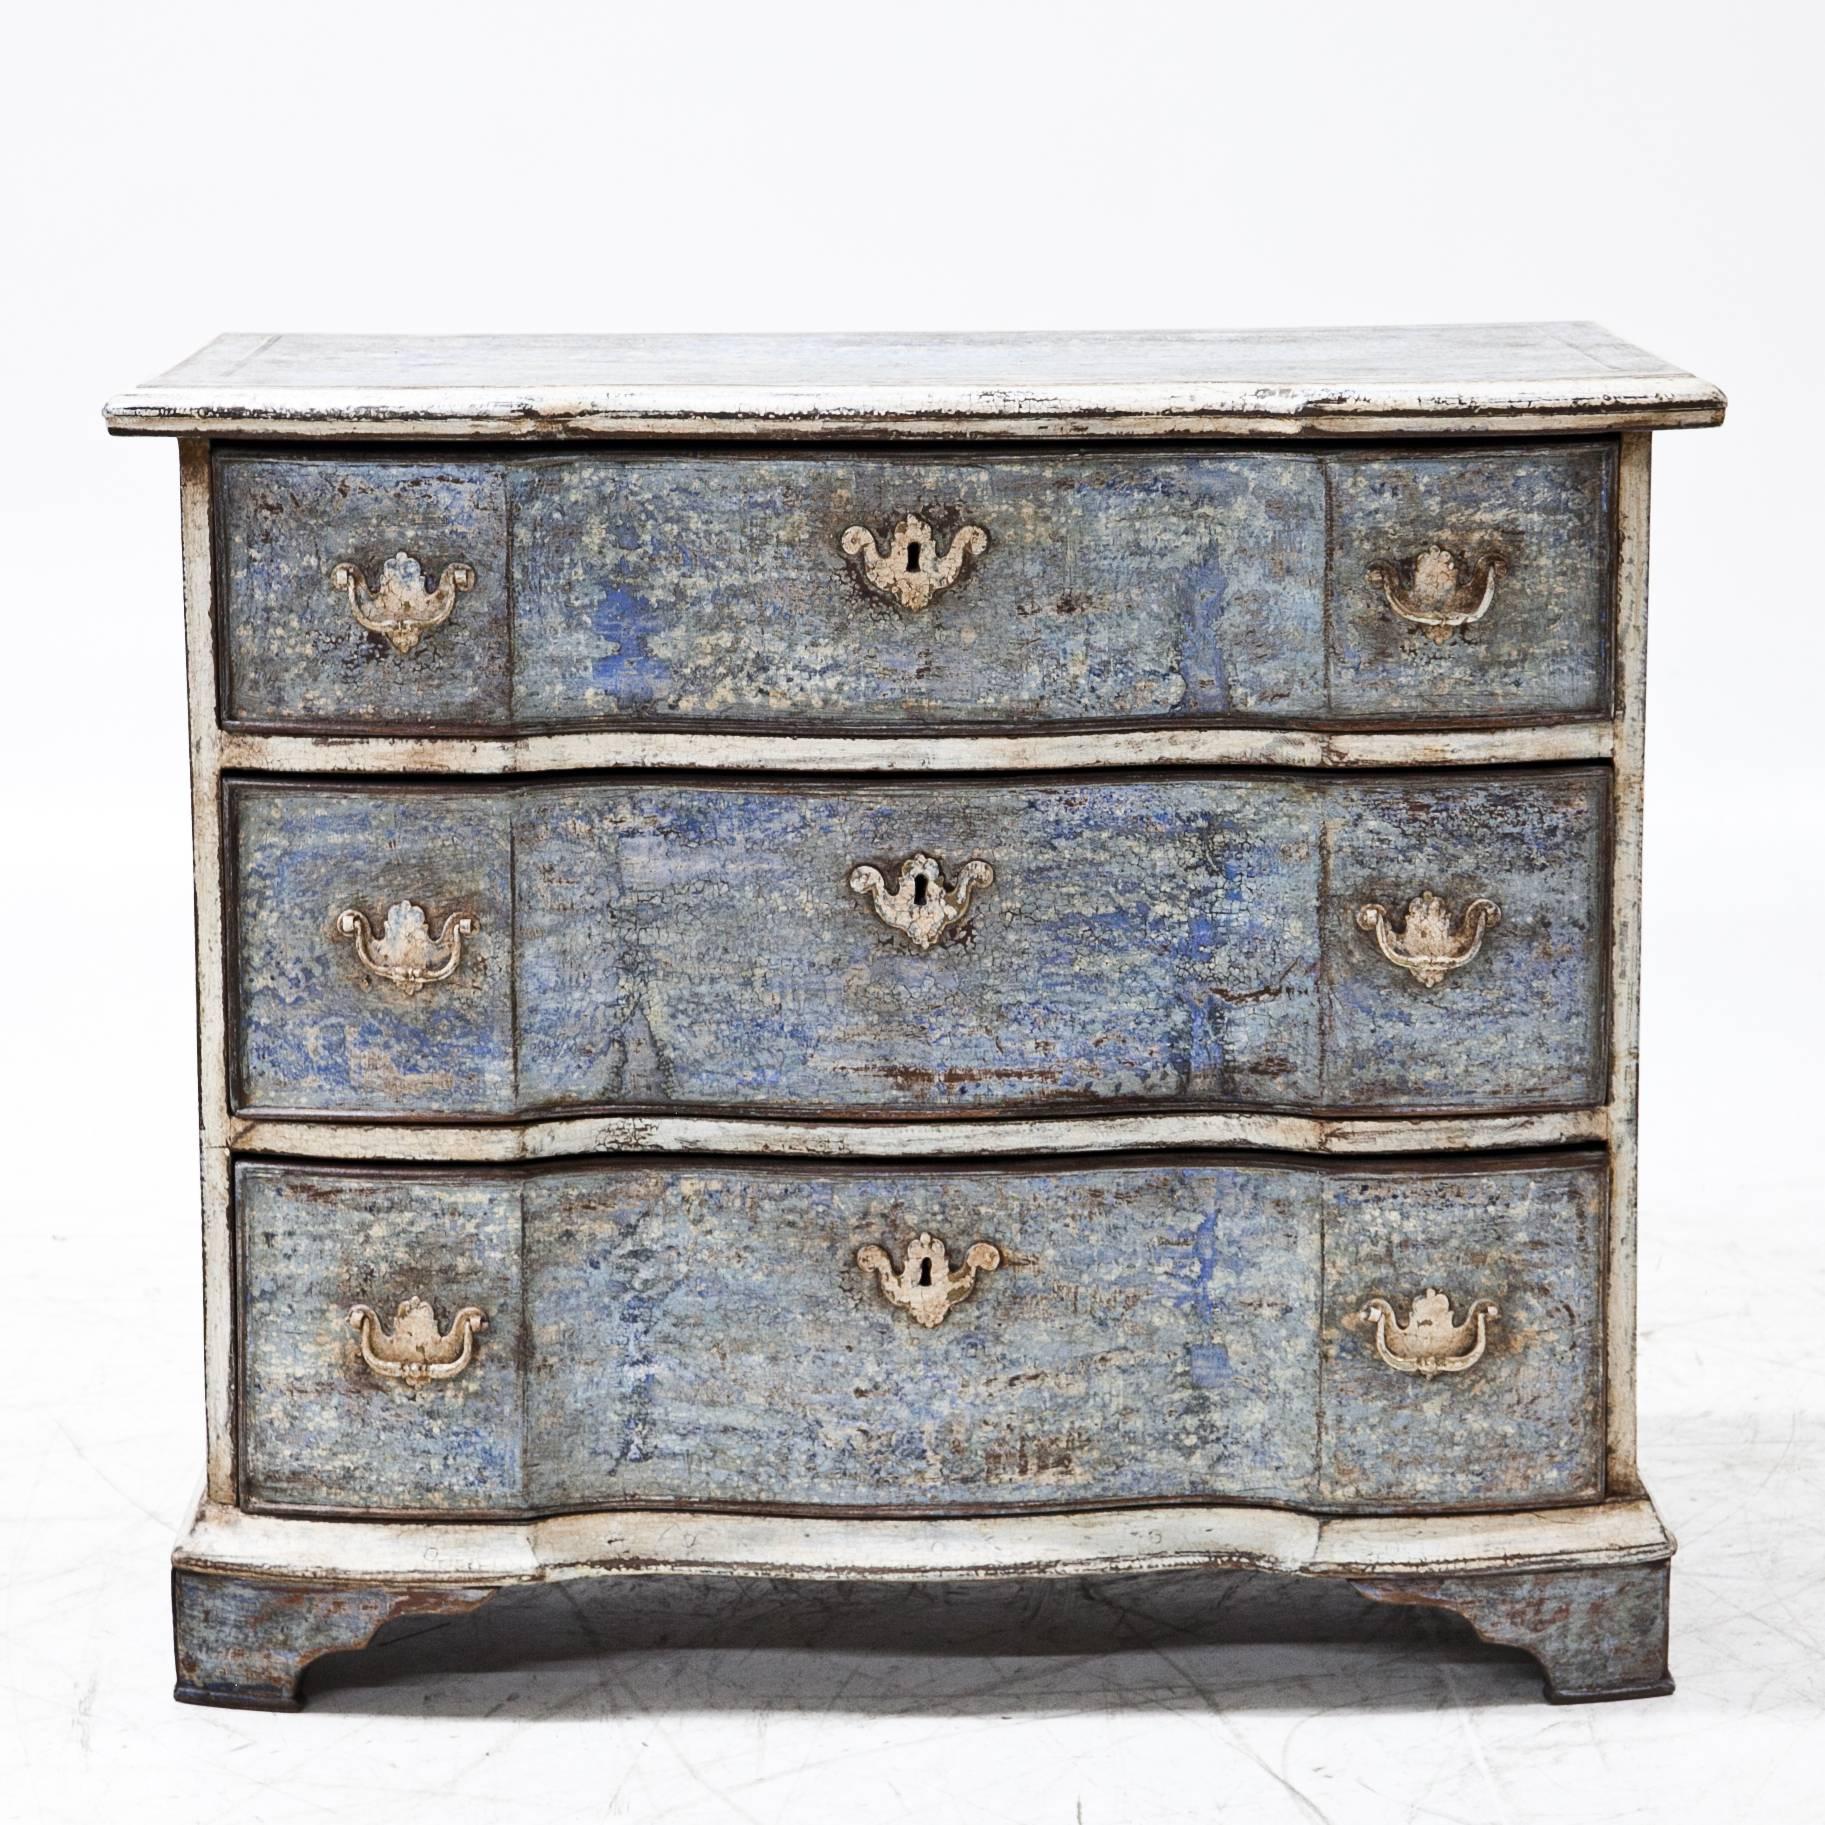 Three-drawered Baroque chest of drawers with a serpentine front. The paint was redone after traditional designs. The worn look gives it a wonderful decorative character.